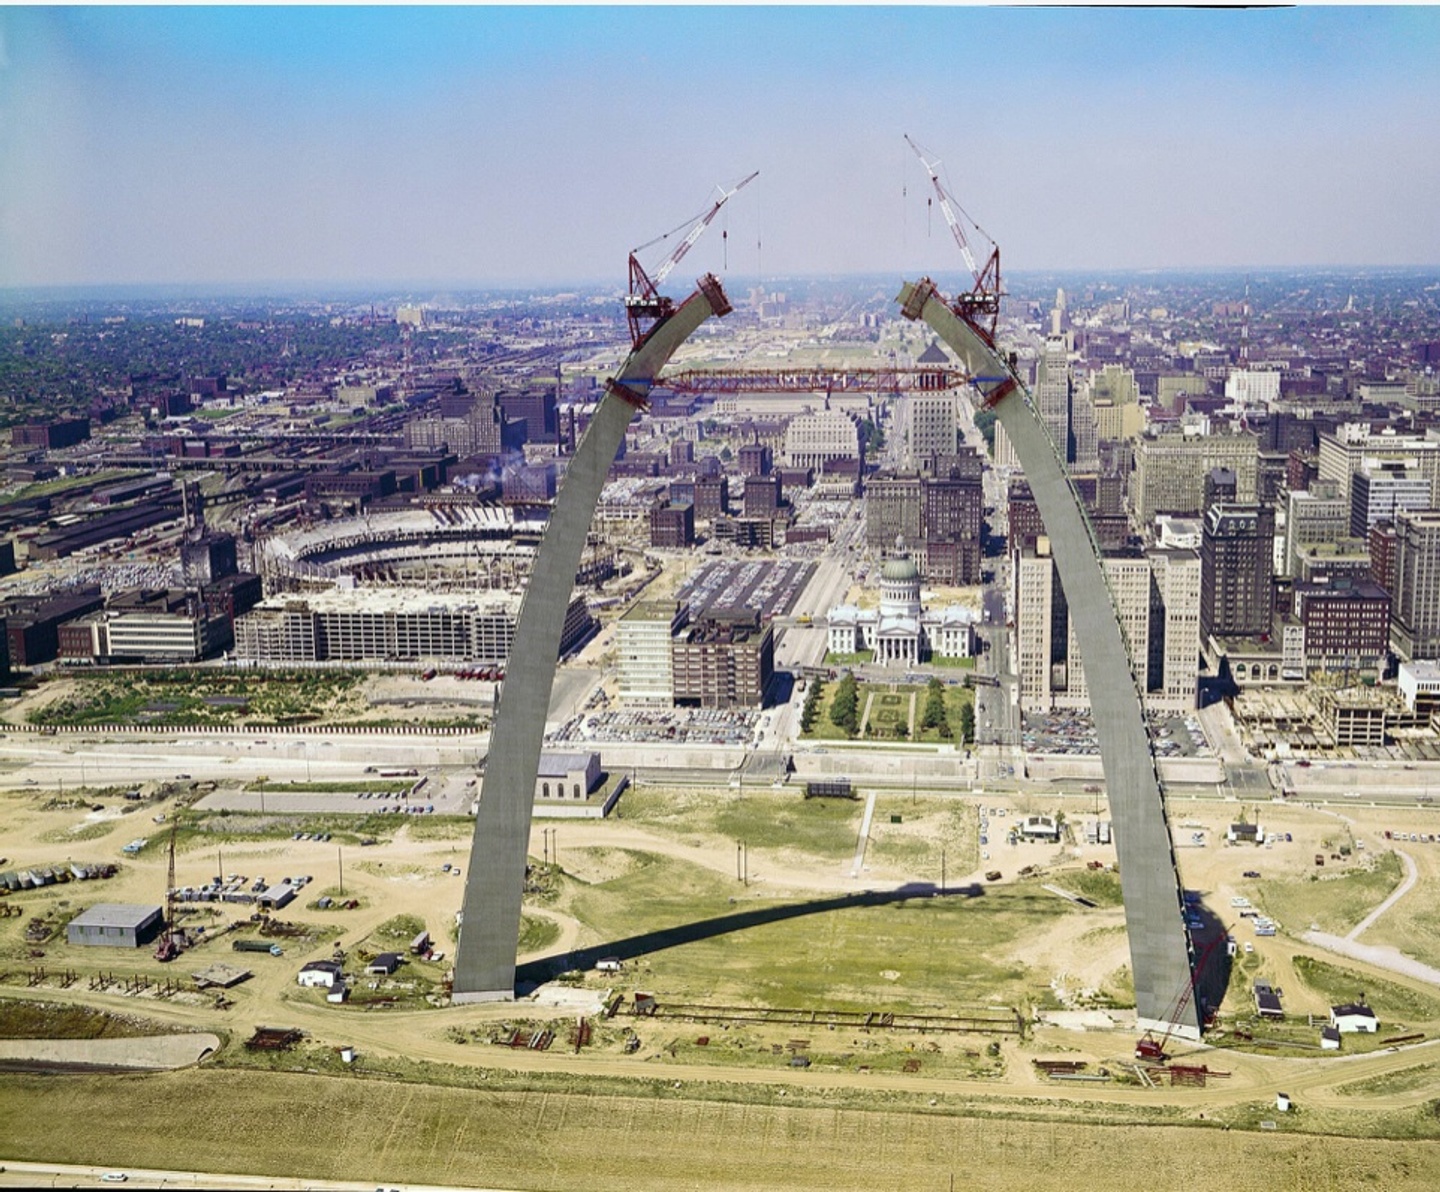 Construction of the St. Louis Arch